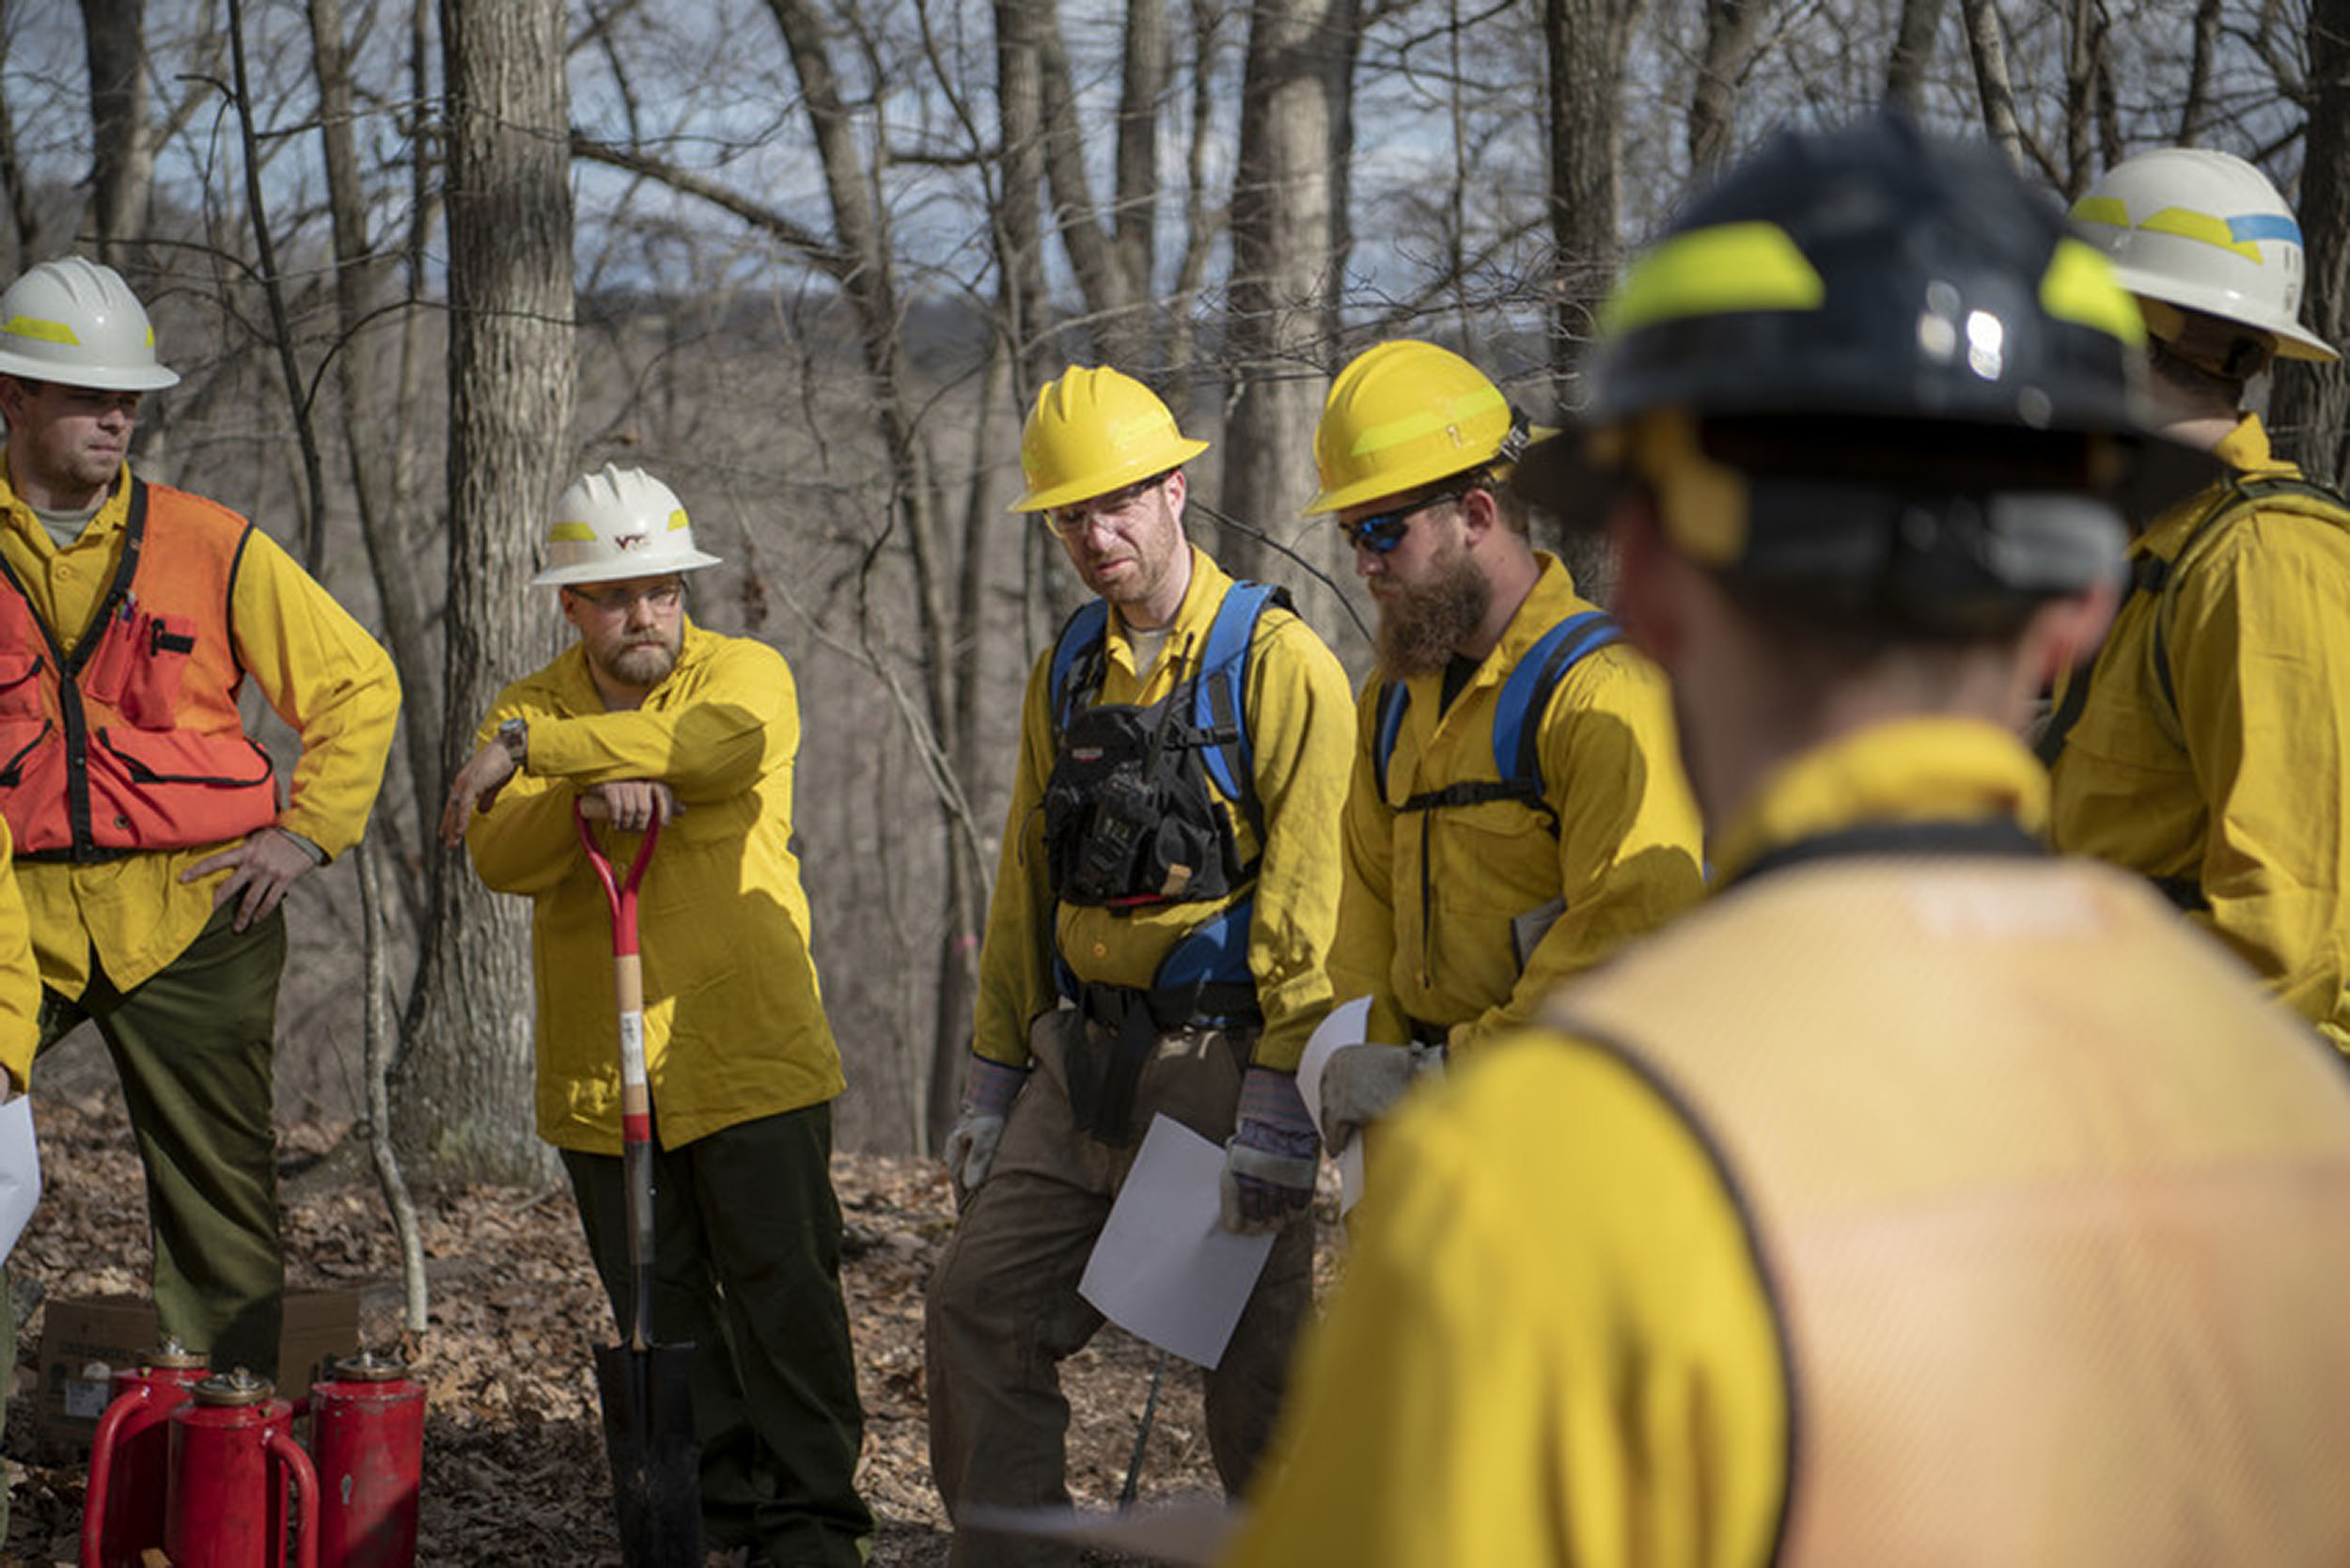 The pre-burn briefing, which includes task assignments and a review of safety measures, is a critical part of any prescribed burn